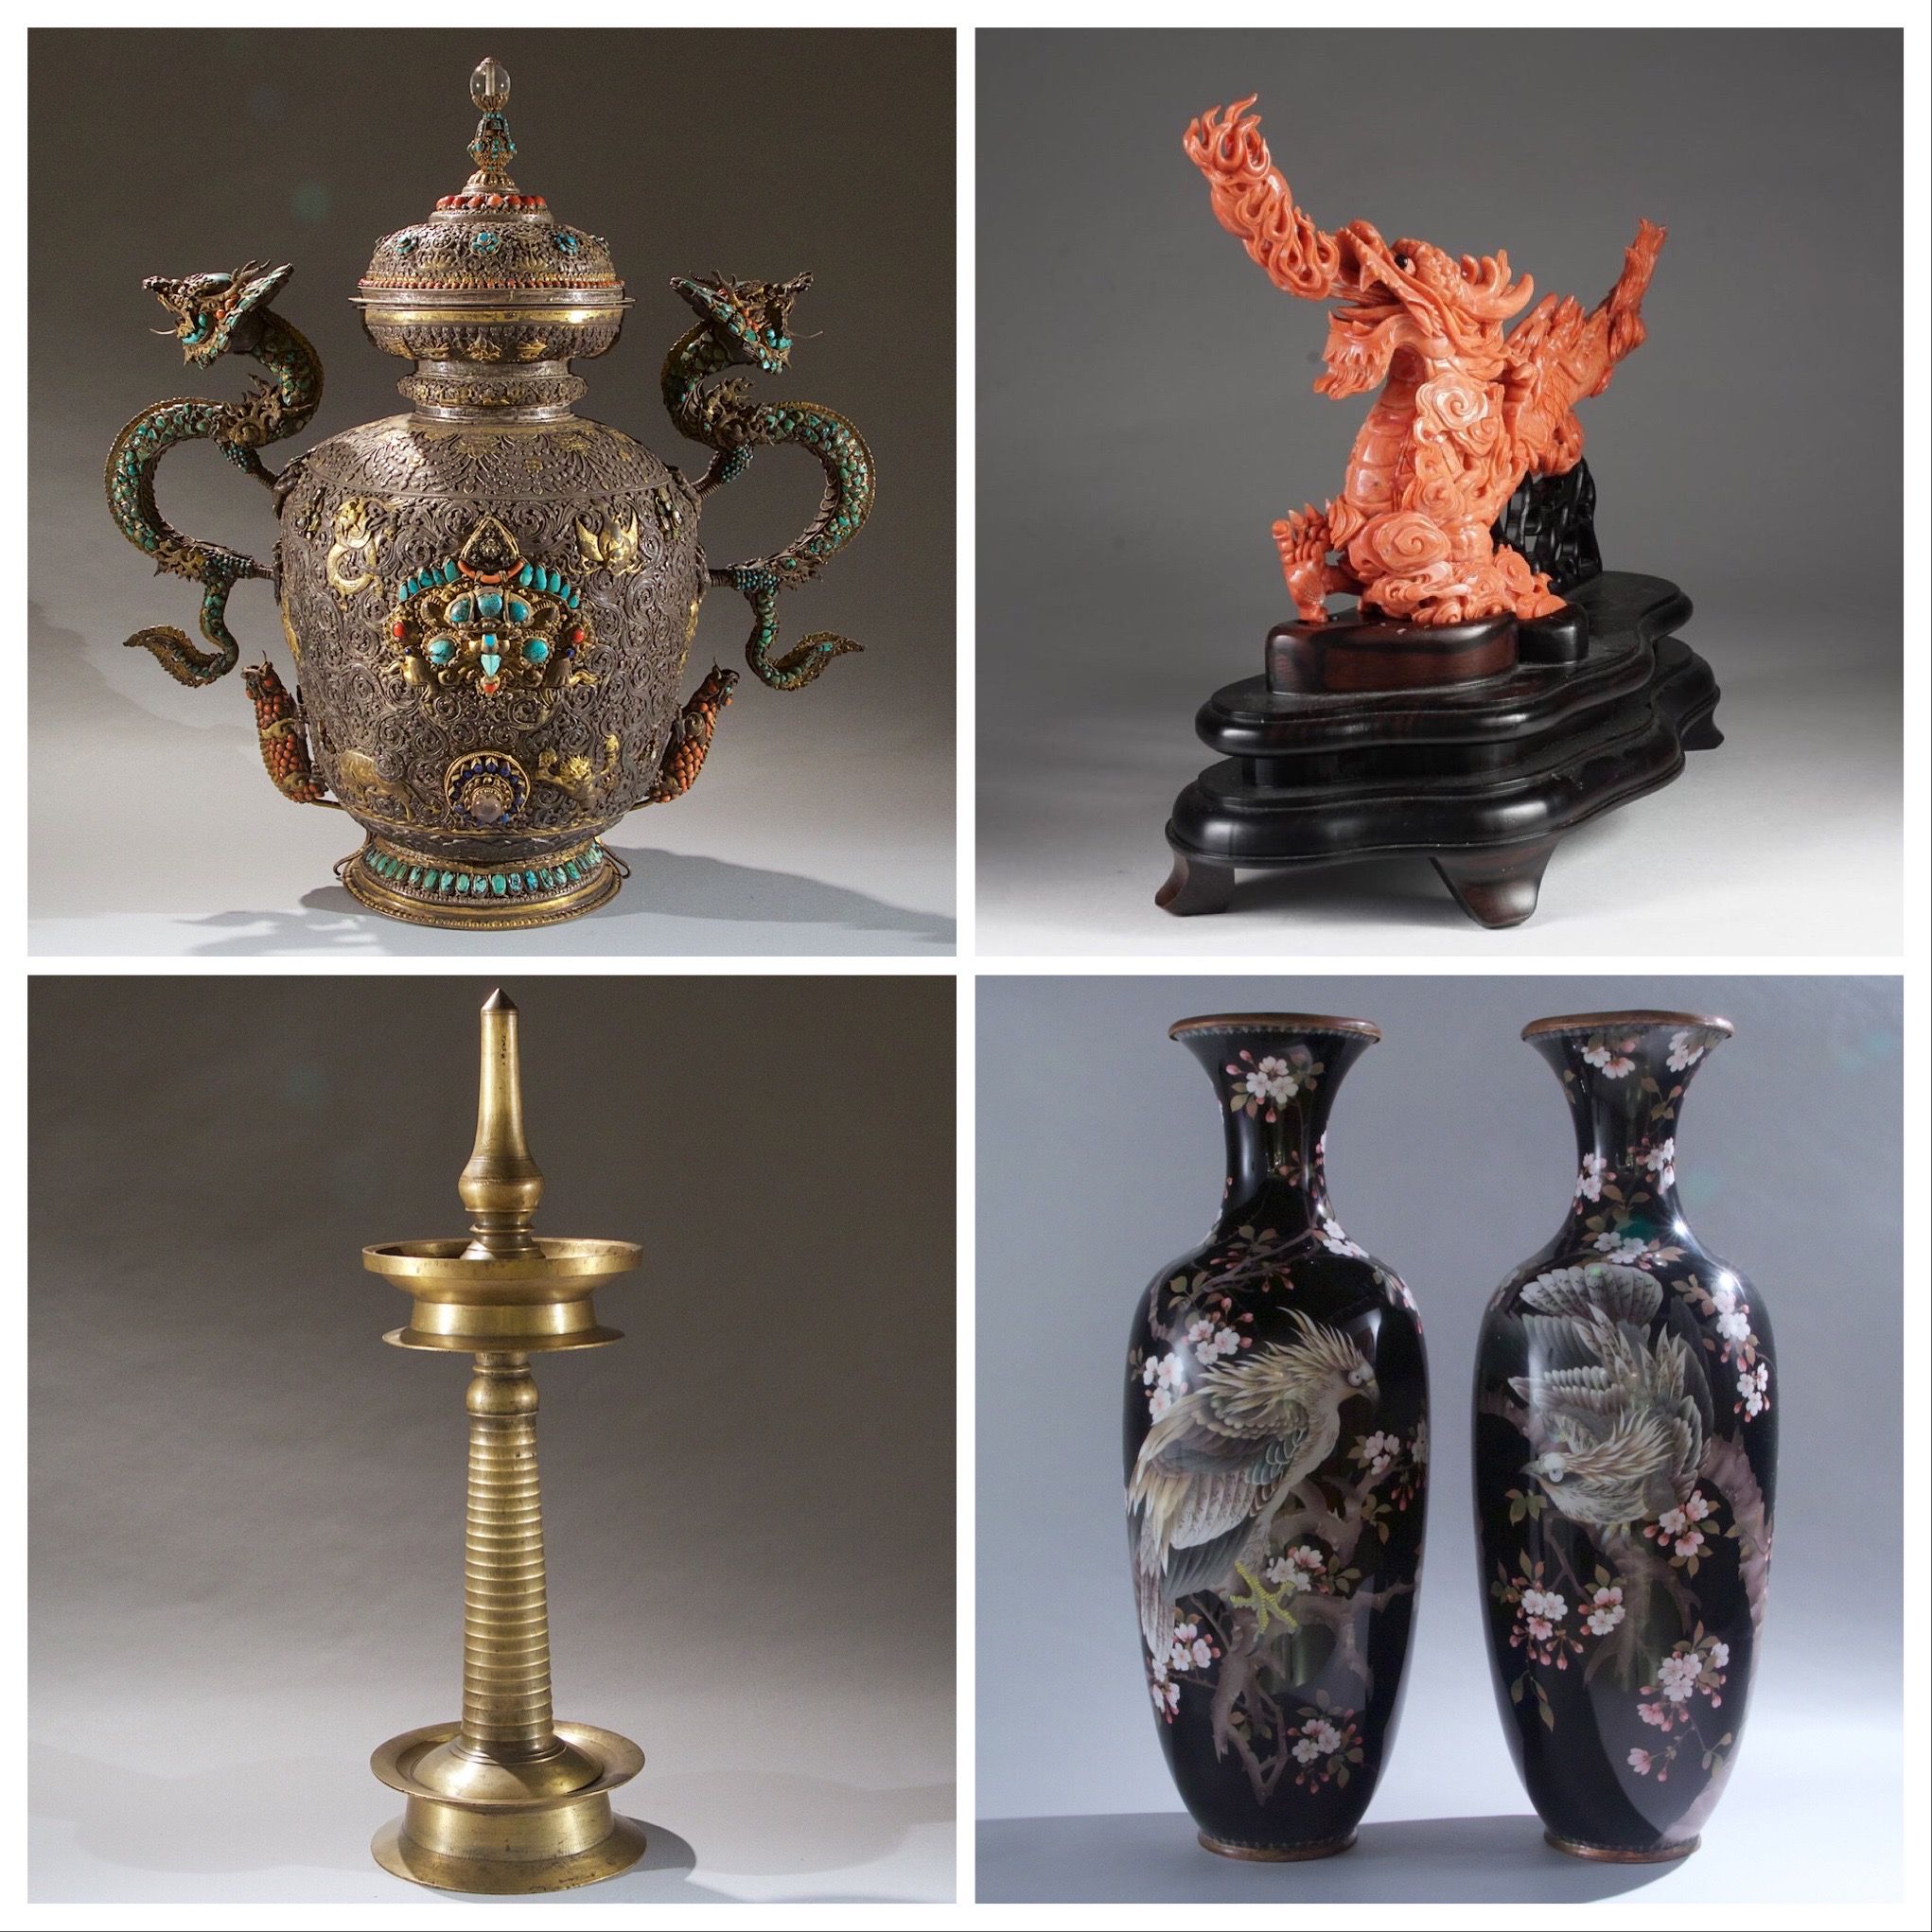 Ritual and Ceremonial Ewer/Urn, Chinese Carved Coral Dragon with Fire from Qing Dynasty, Pair of Very Large Japanese Vases, Bronze temple lamp unique with liner on stand,